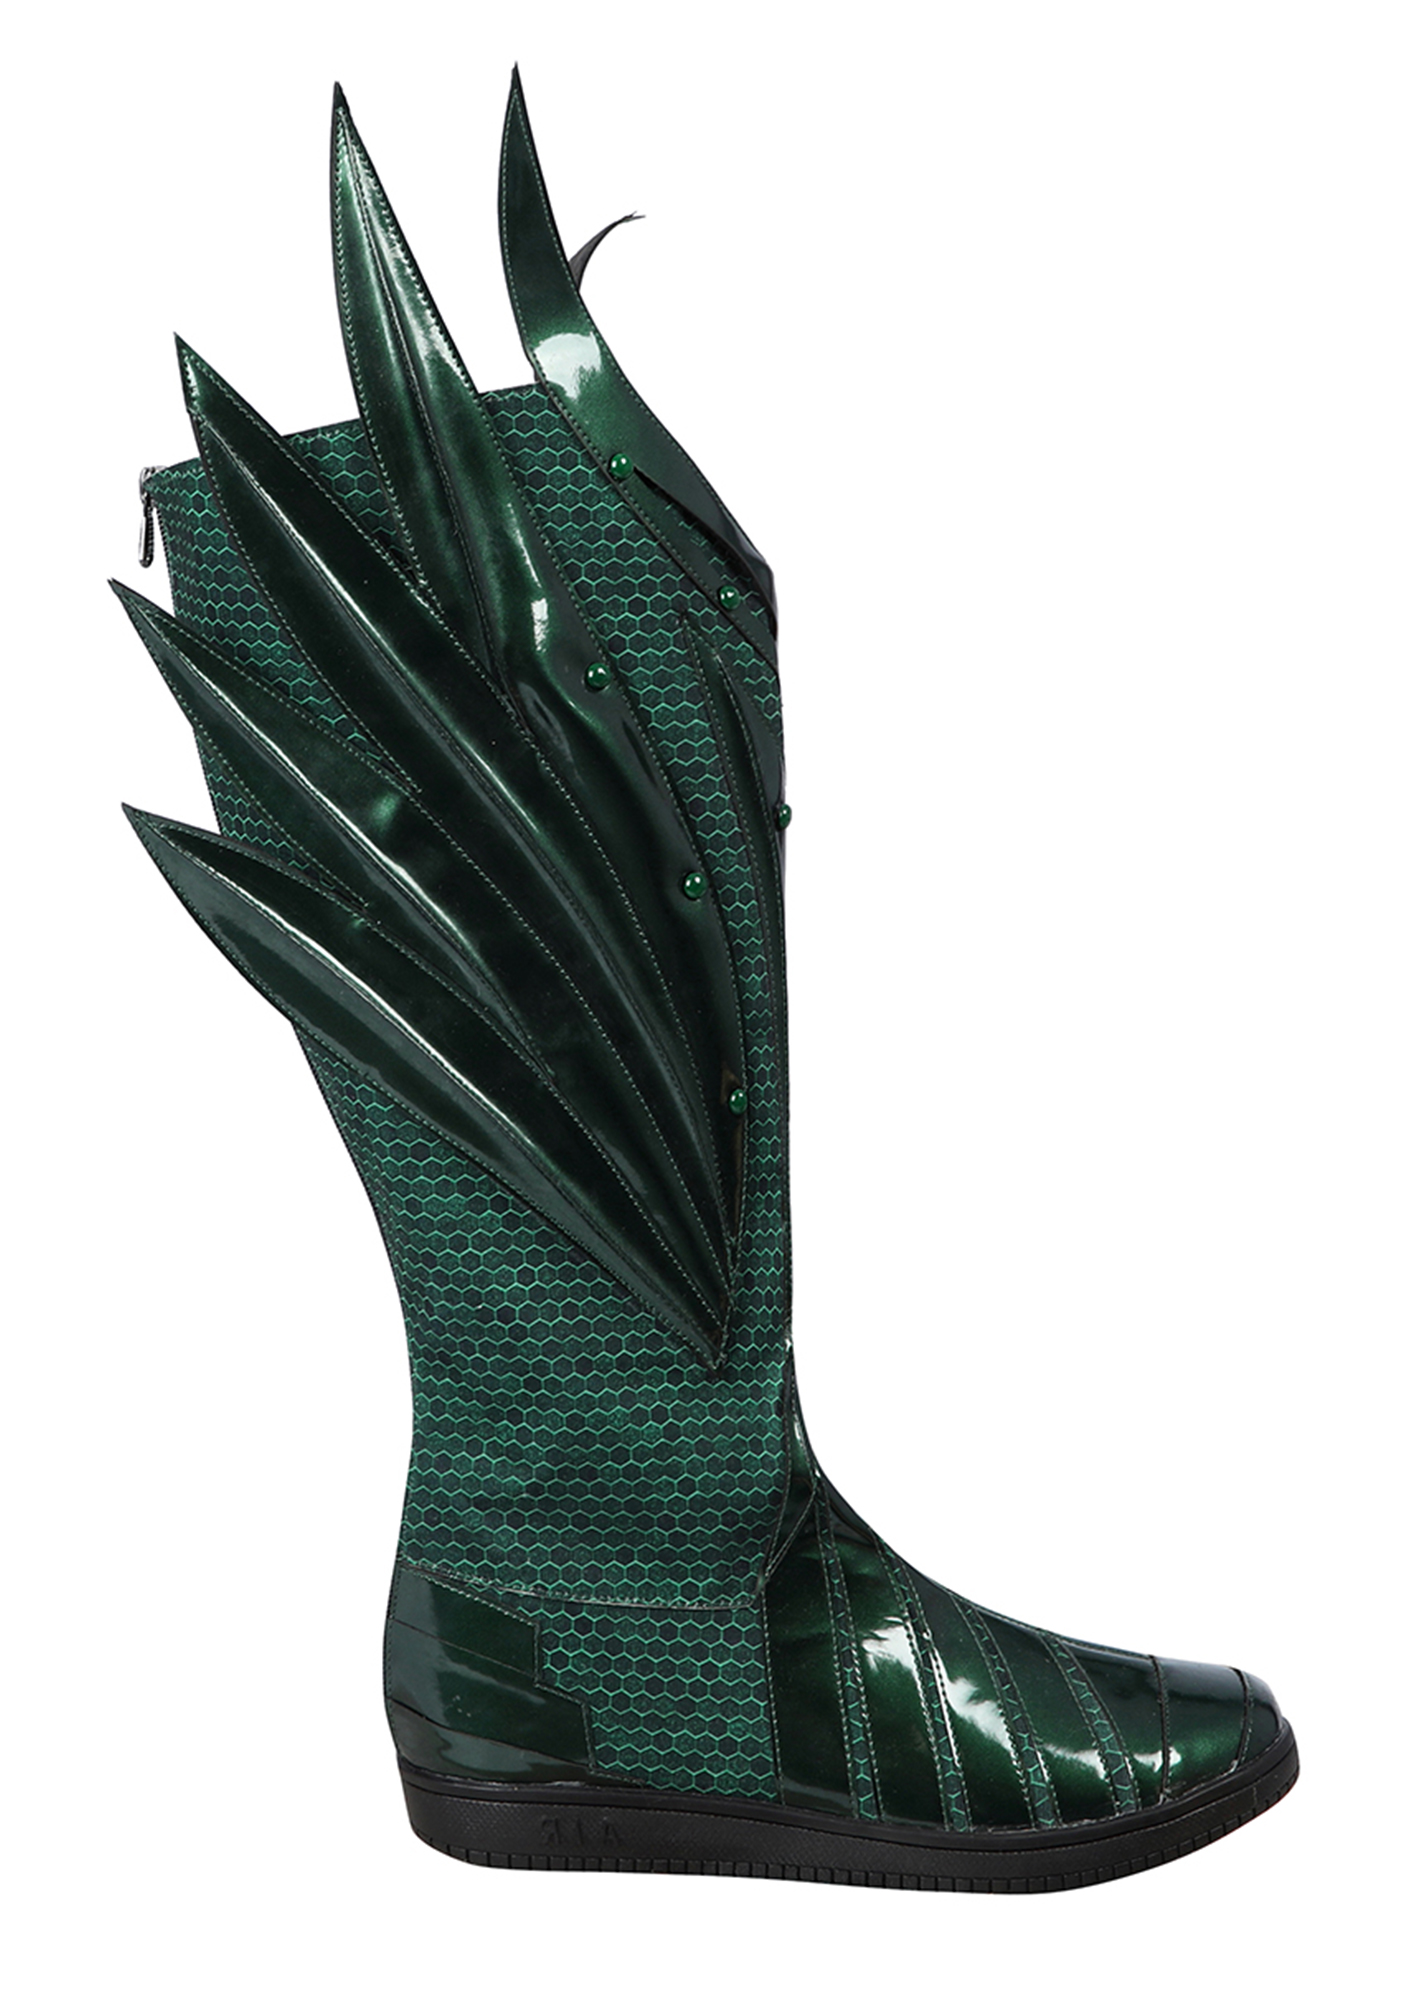 Arthur Curry Aquaman Shoes Aquaman and the Lost Kingdom Boots Cosplay